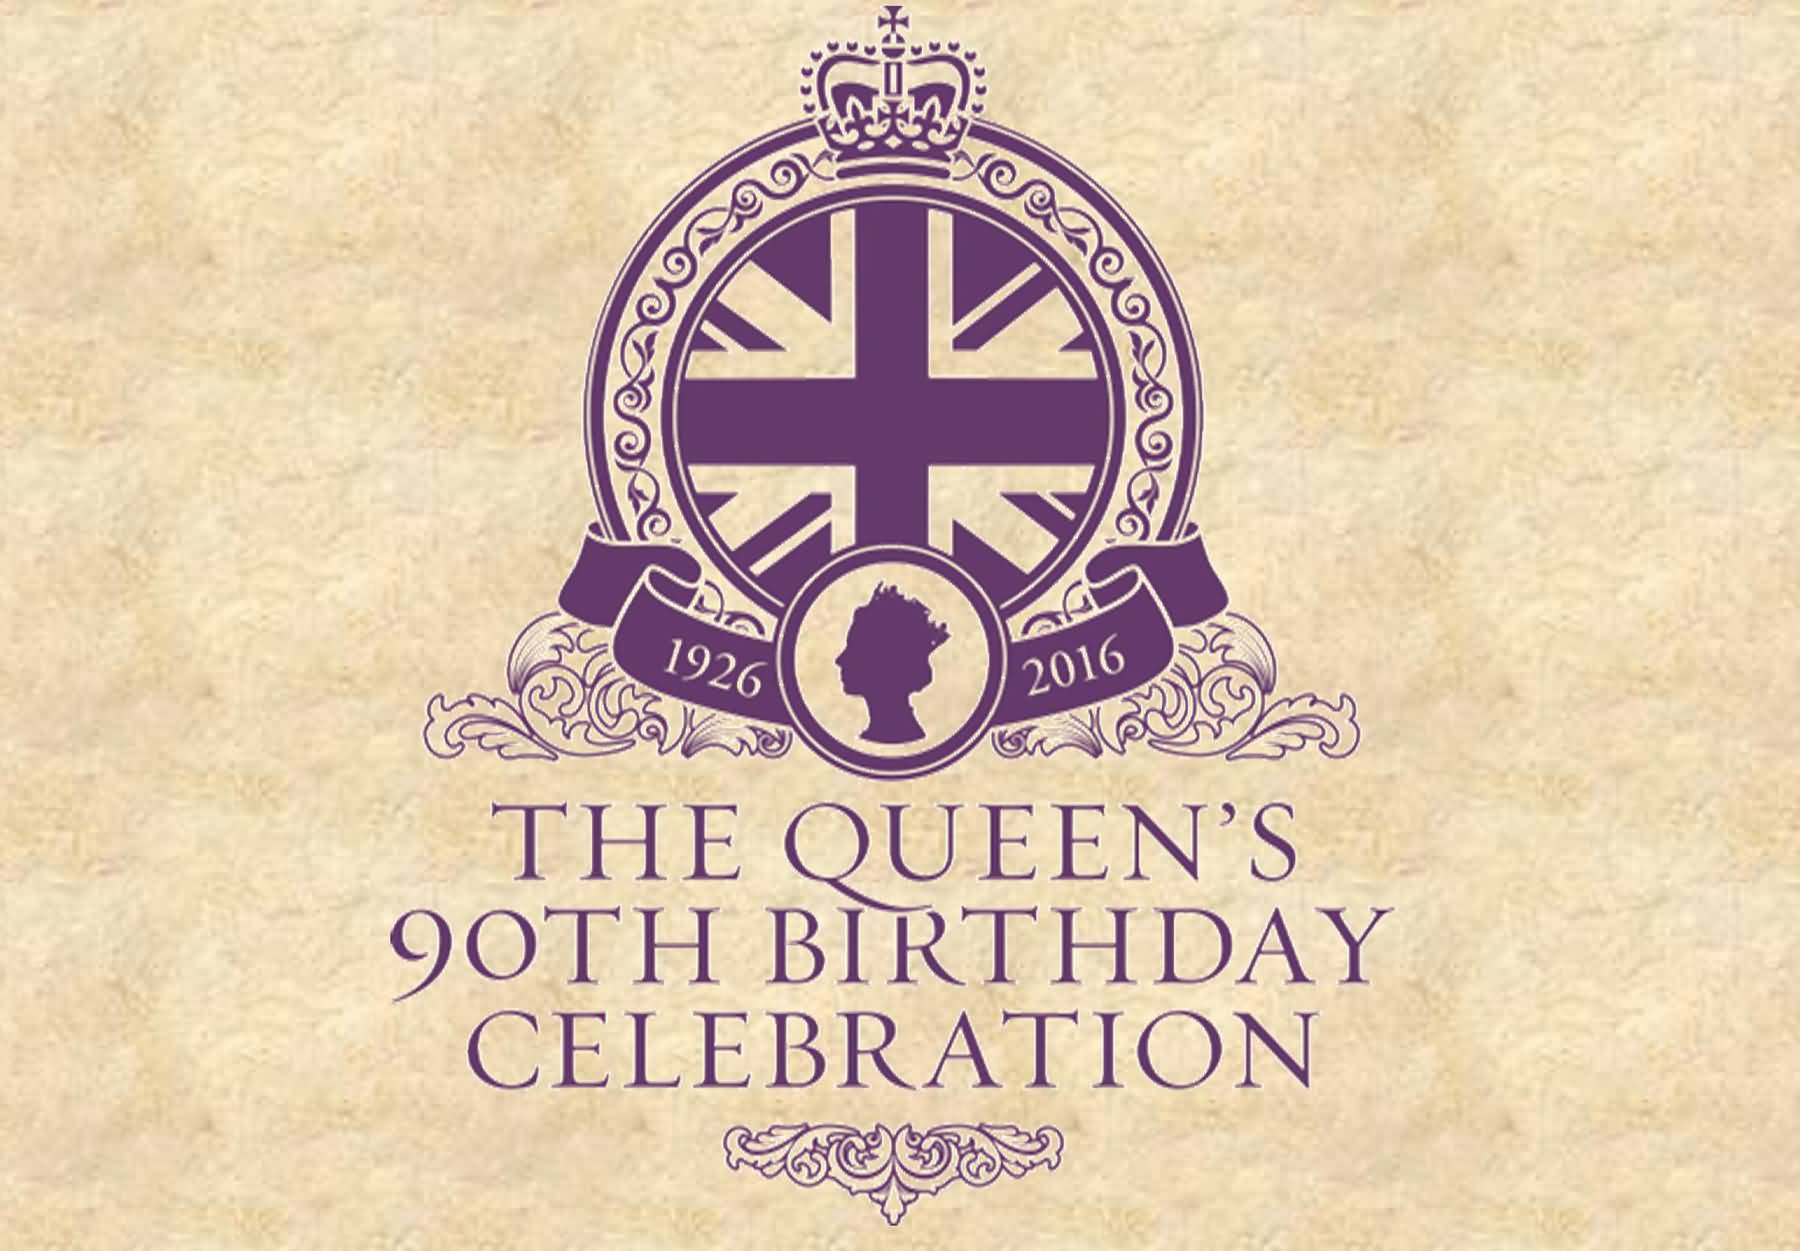 The Queen's 90th Birthday Celebration Greeting